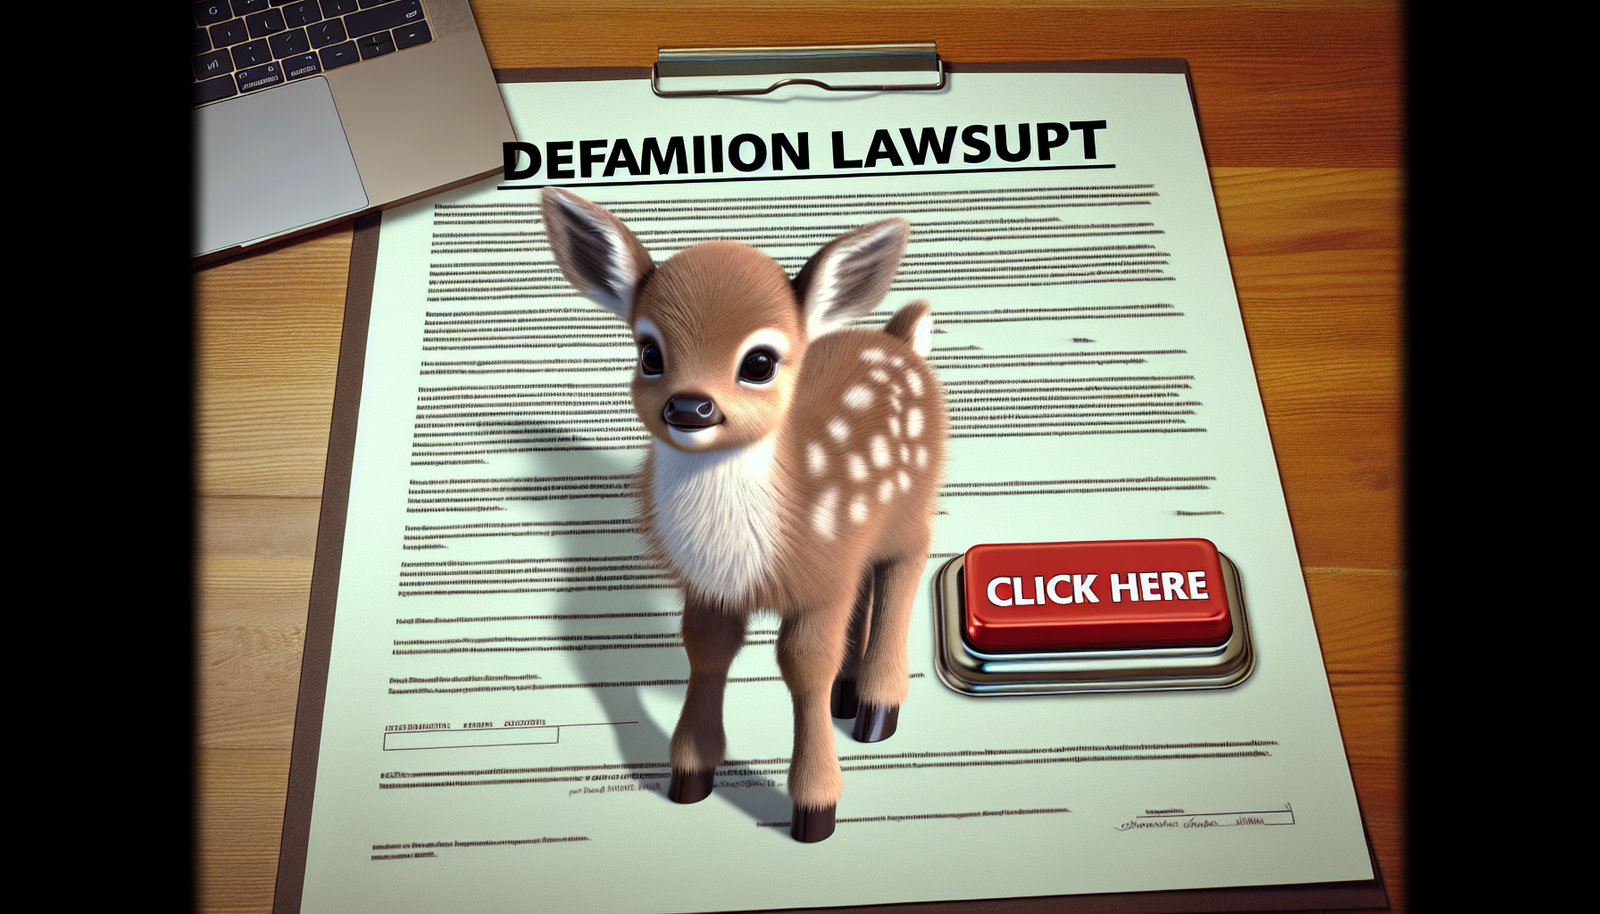 learn about the defamation lawsuit over 'baby reindeer' and whether netflix is in big trouble. get the full explanation here.